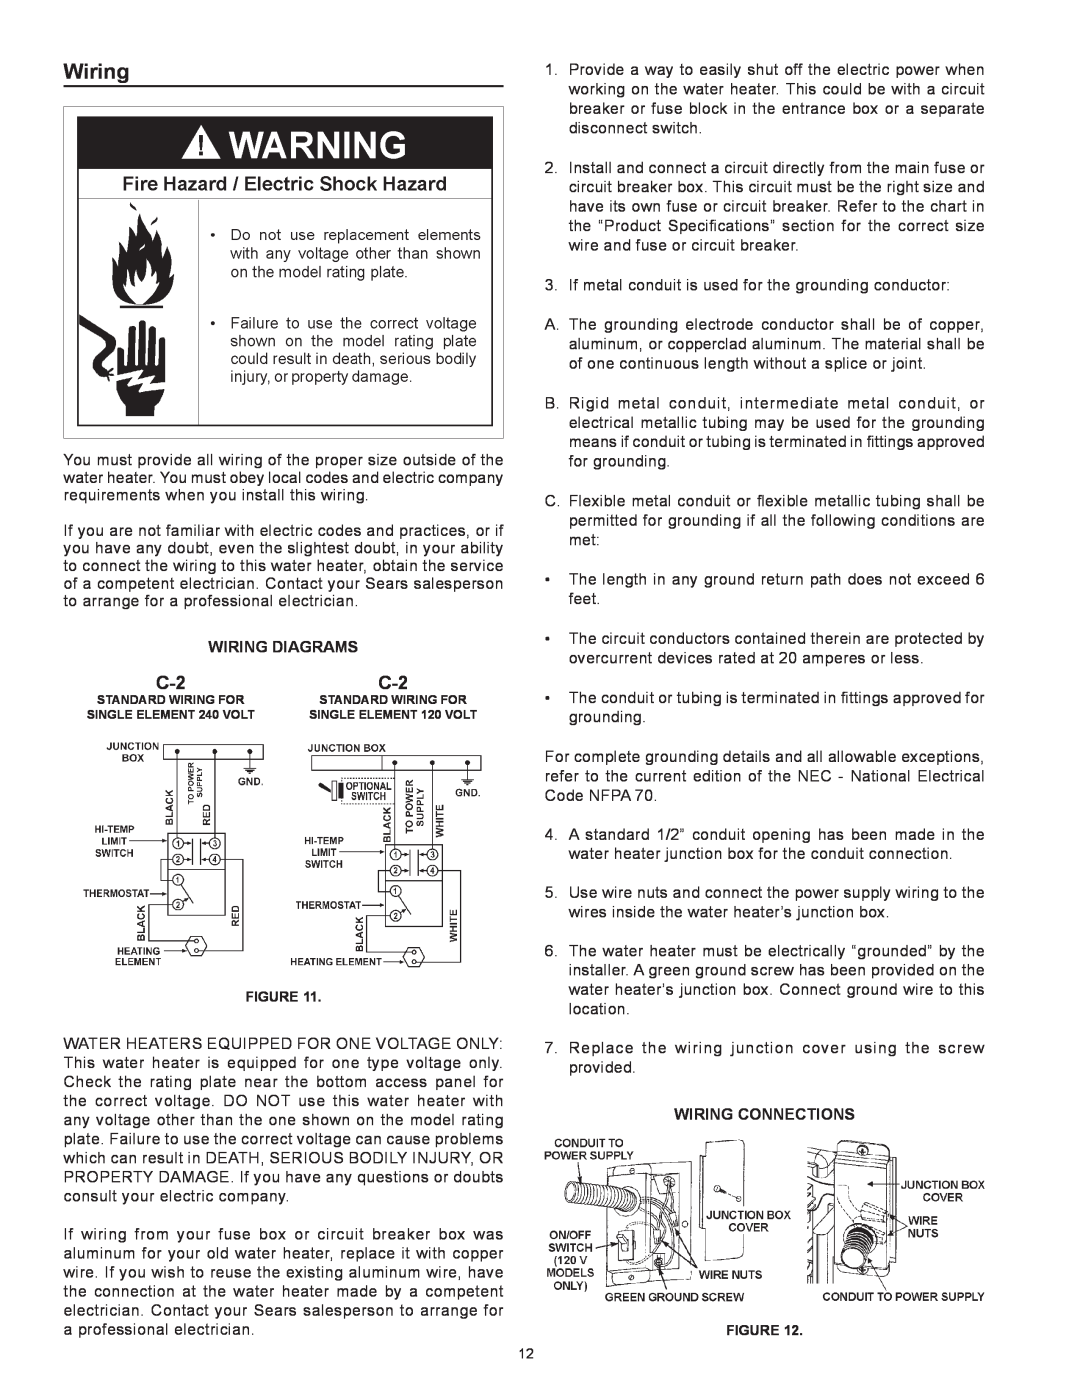 Kenmore 153.31604 owner manual Wiring Diagrams, Wiring Connections 